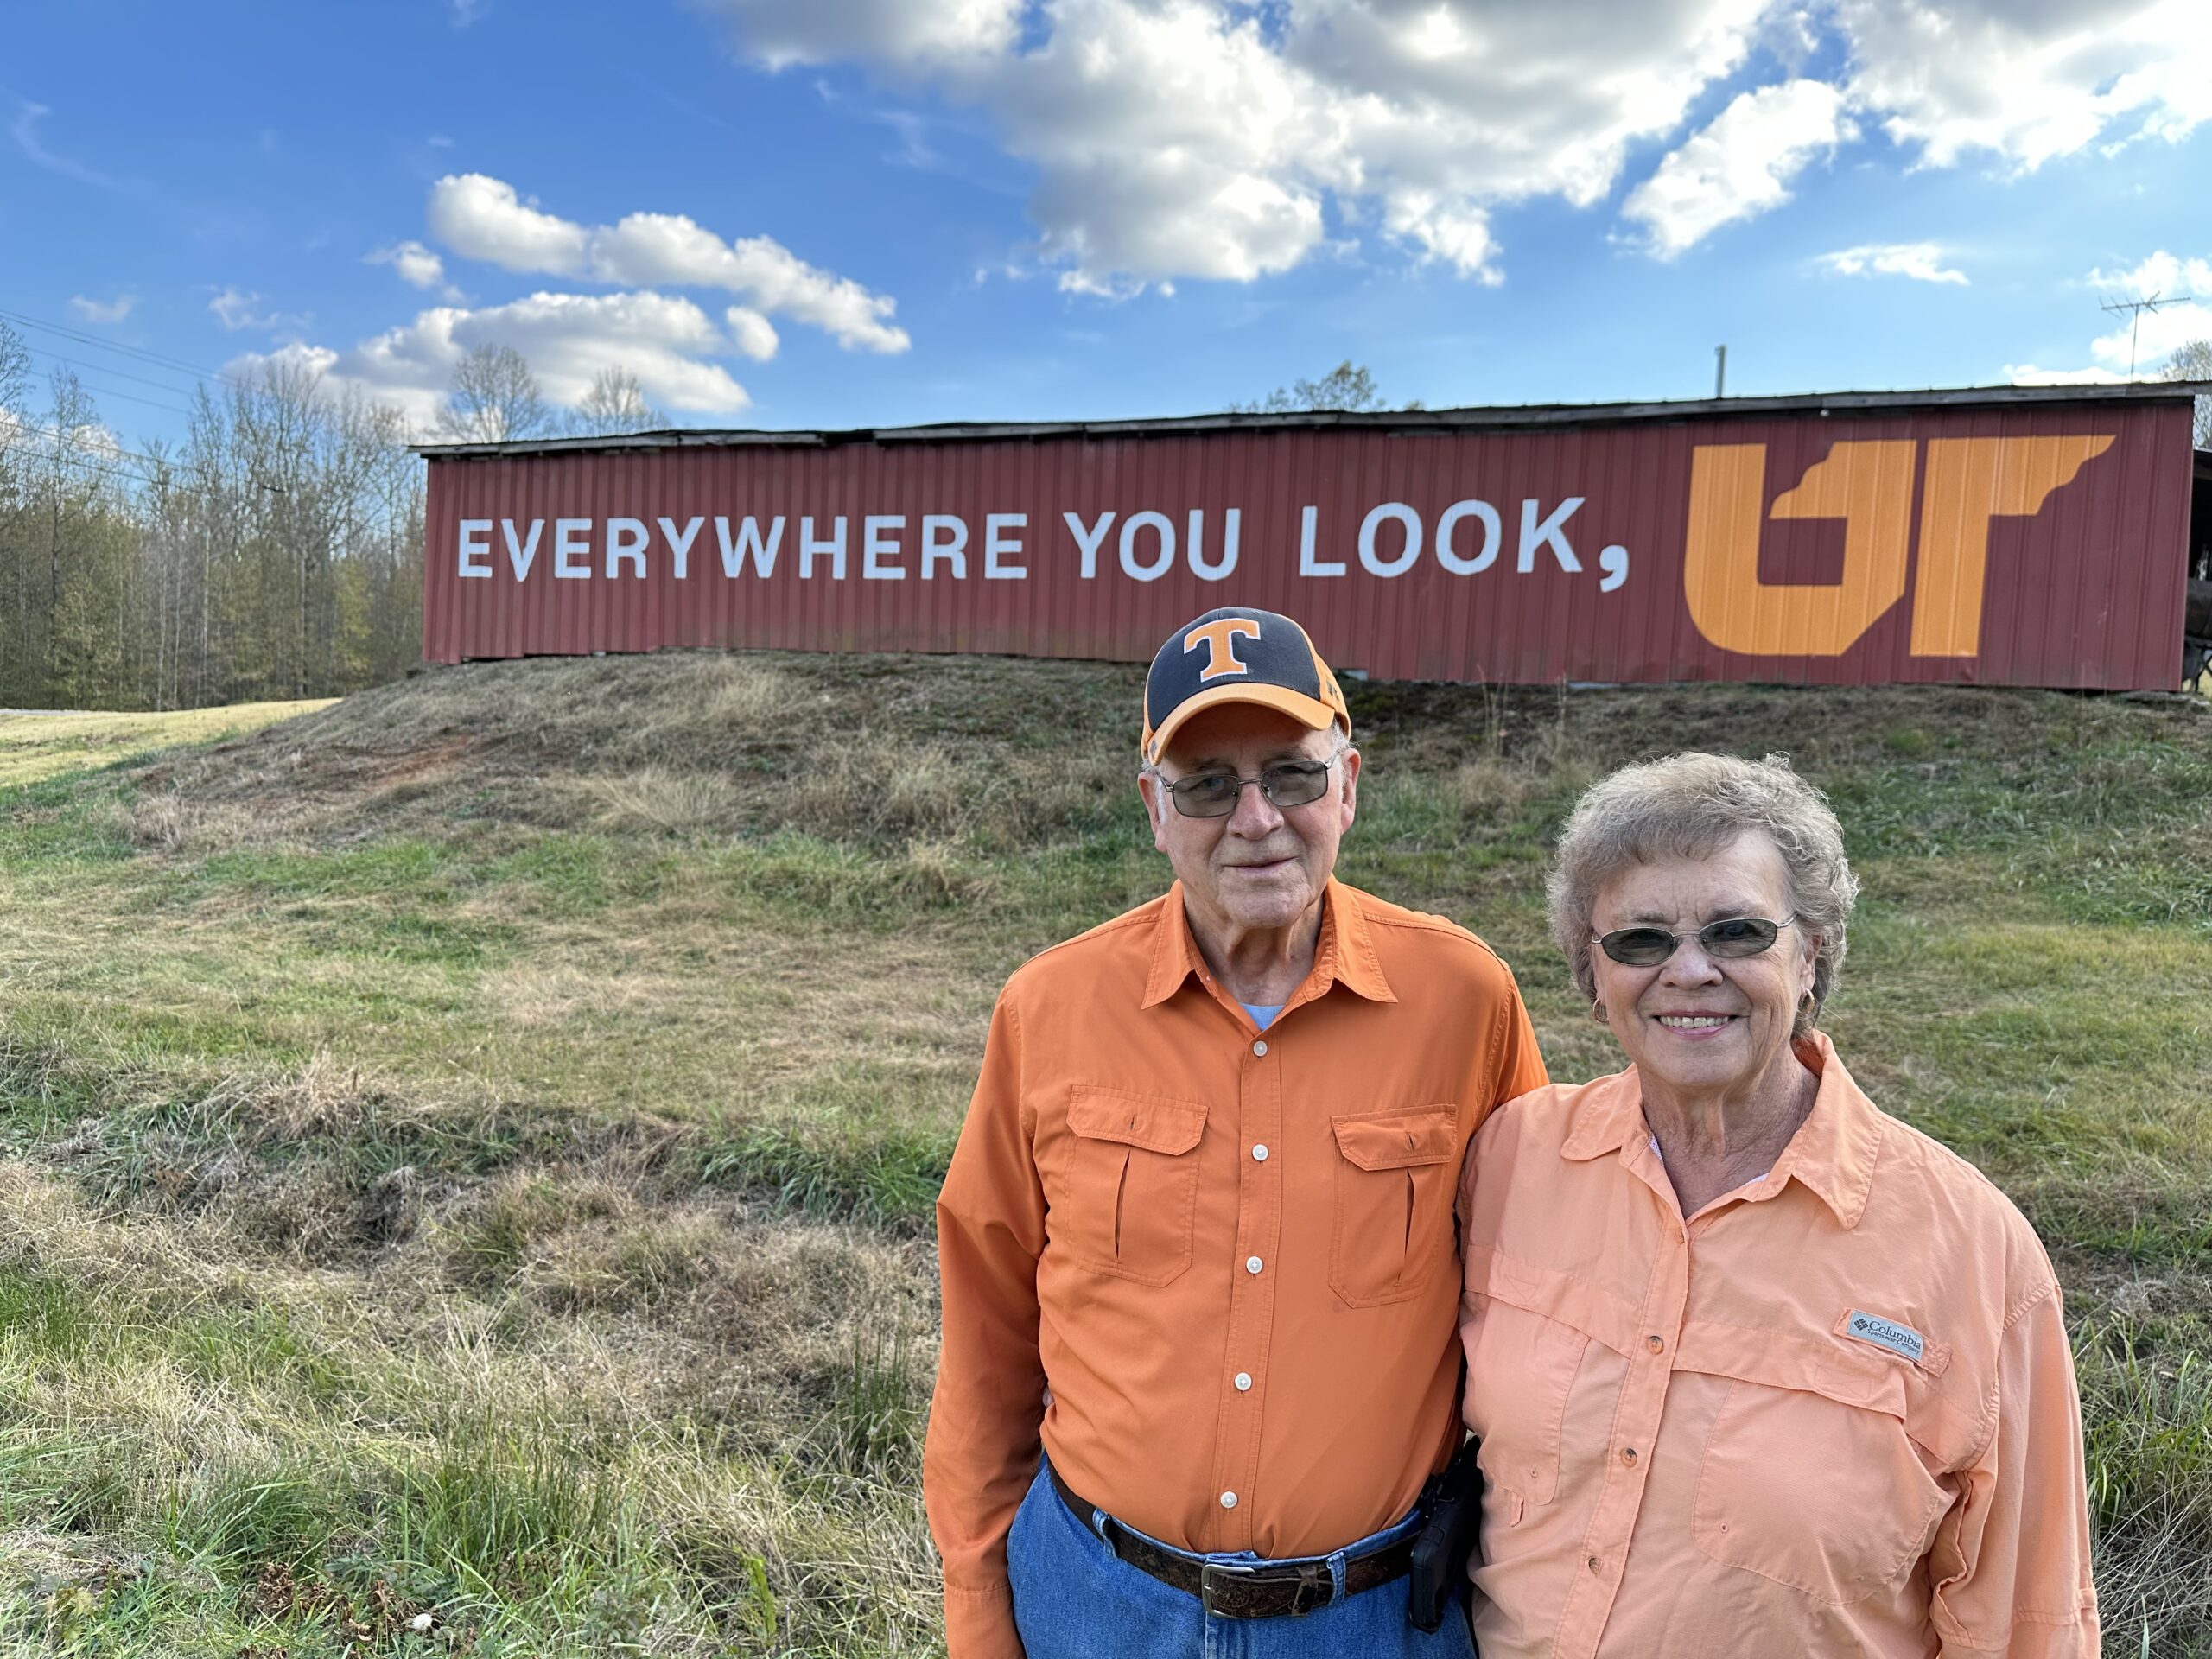 UT alumni Charles and Joyce McBride pose in front of Everywhere You Look, UT mural painted on their red barn